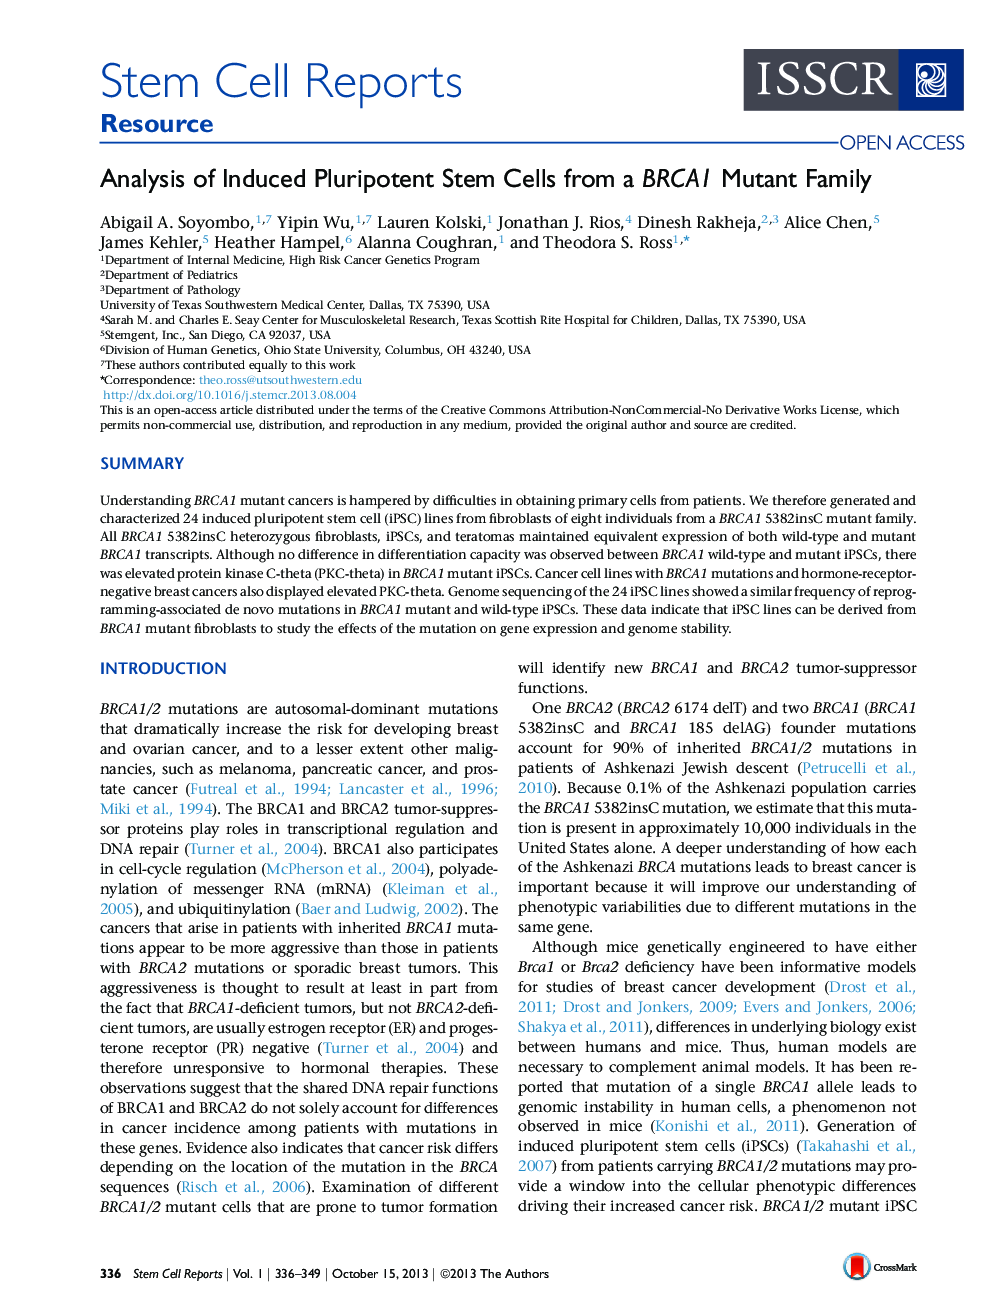 Analysis of Induced Pluripotent Stem Cells from a BRCA1 Mutant Family 